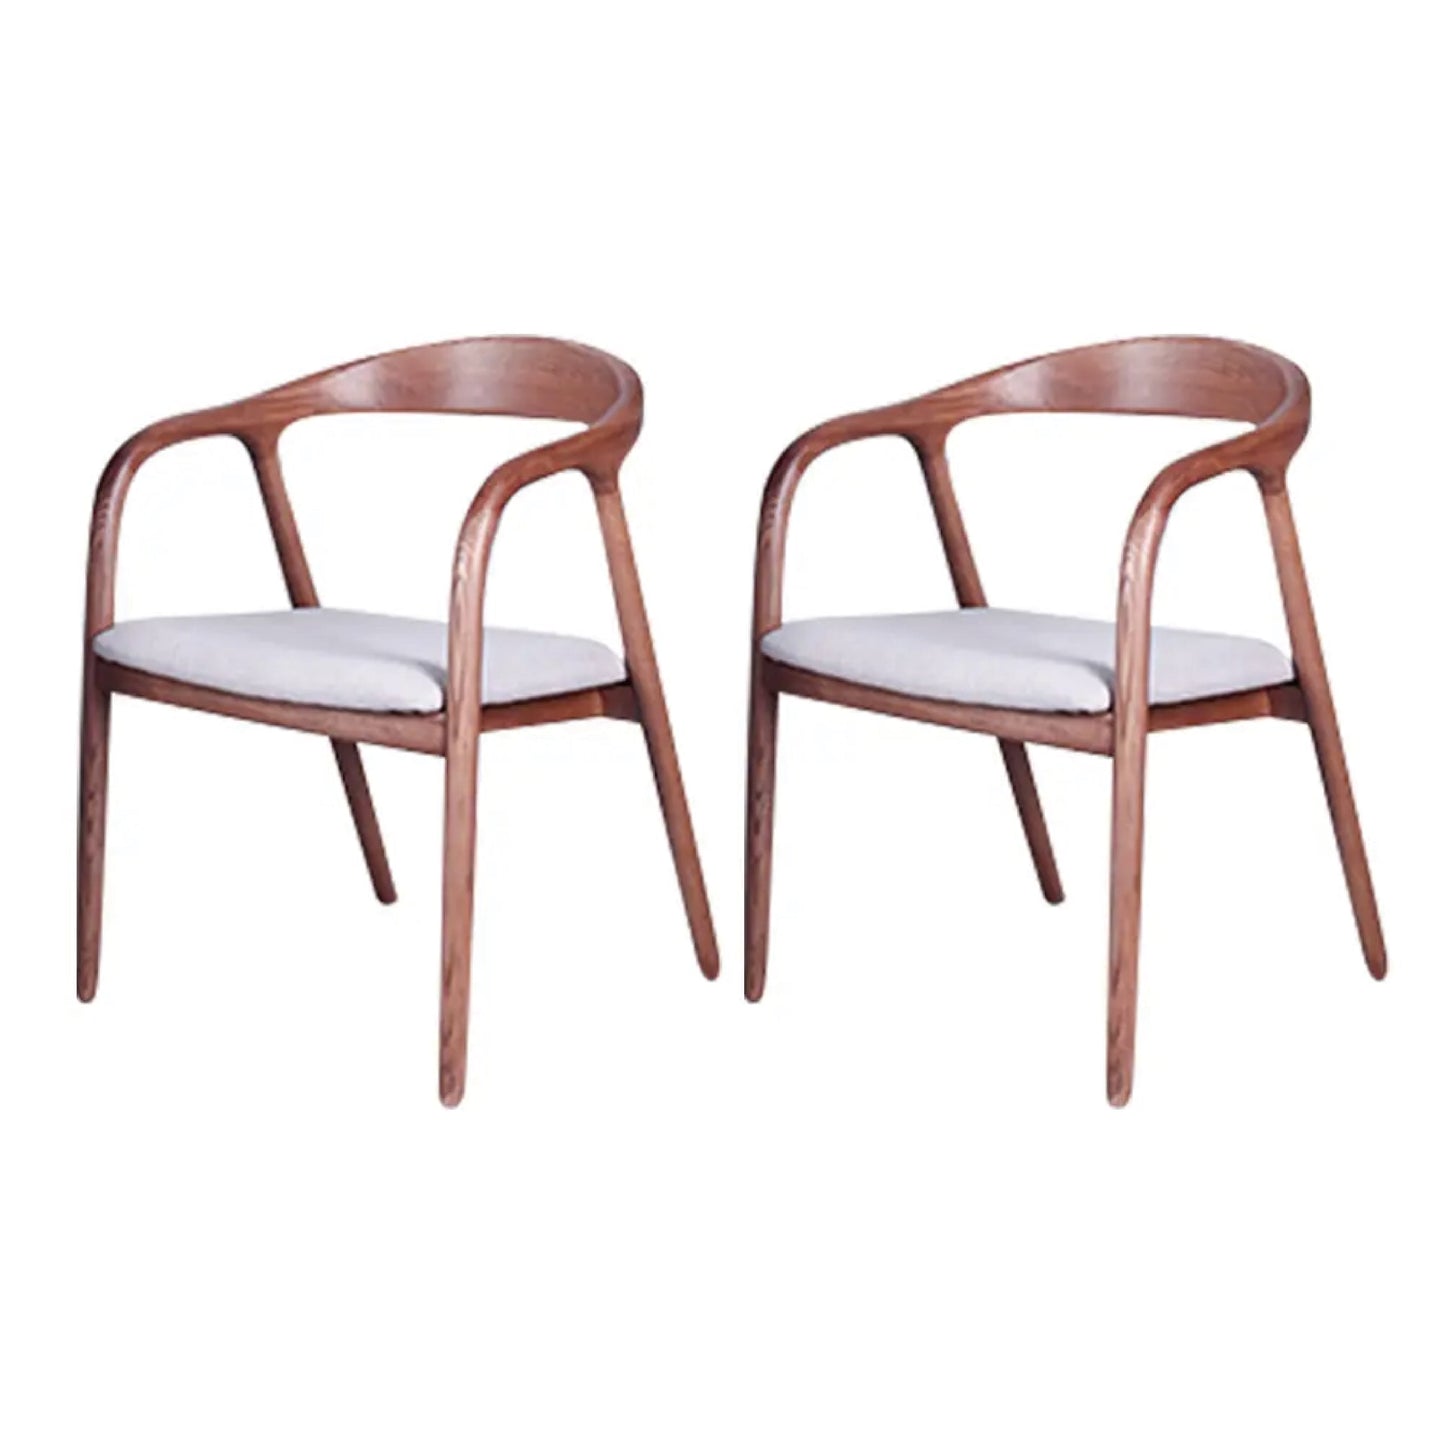 Hiro II Solid Wood Dining Chairs (Set of 2) – Made to order